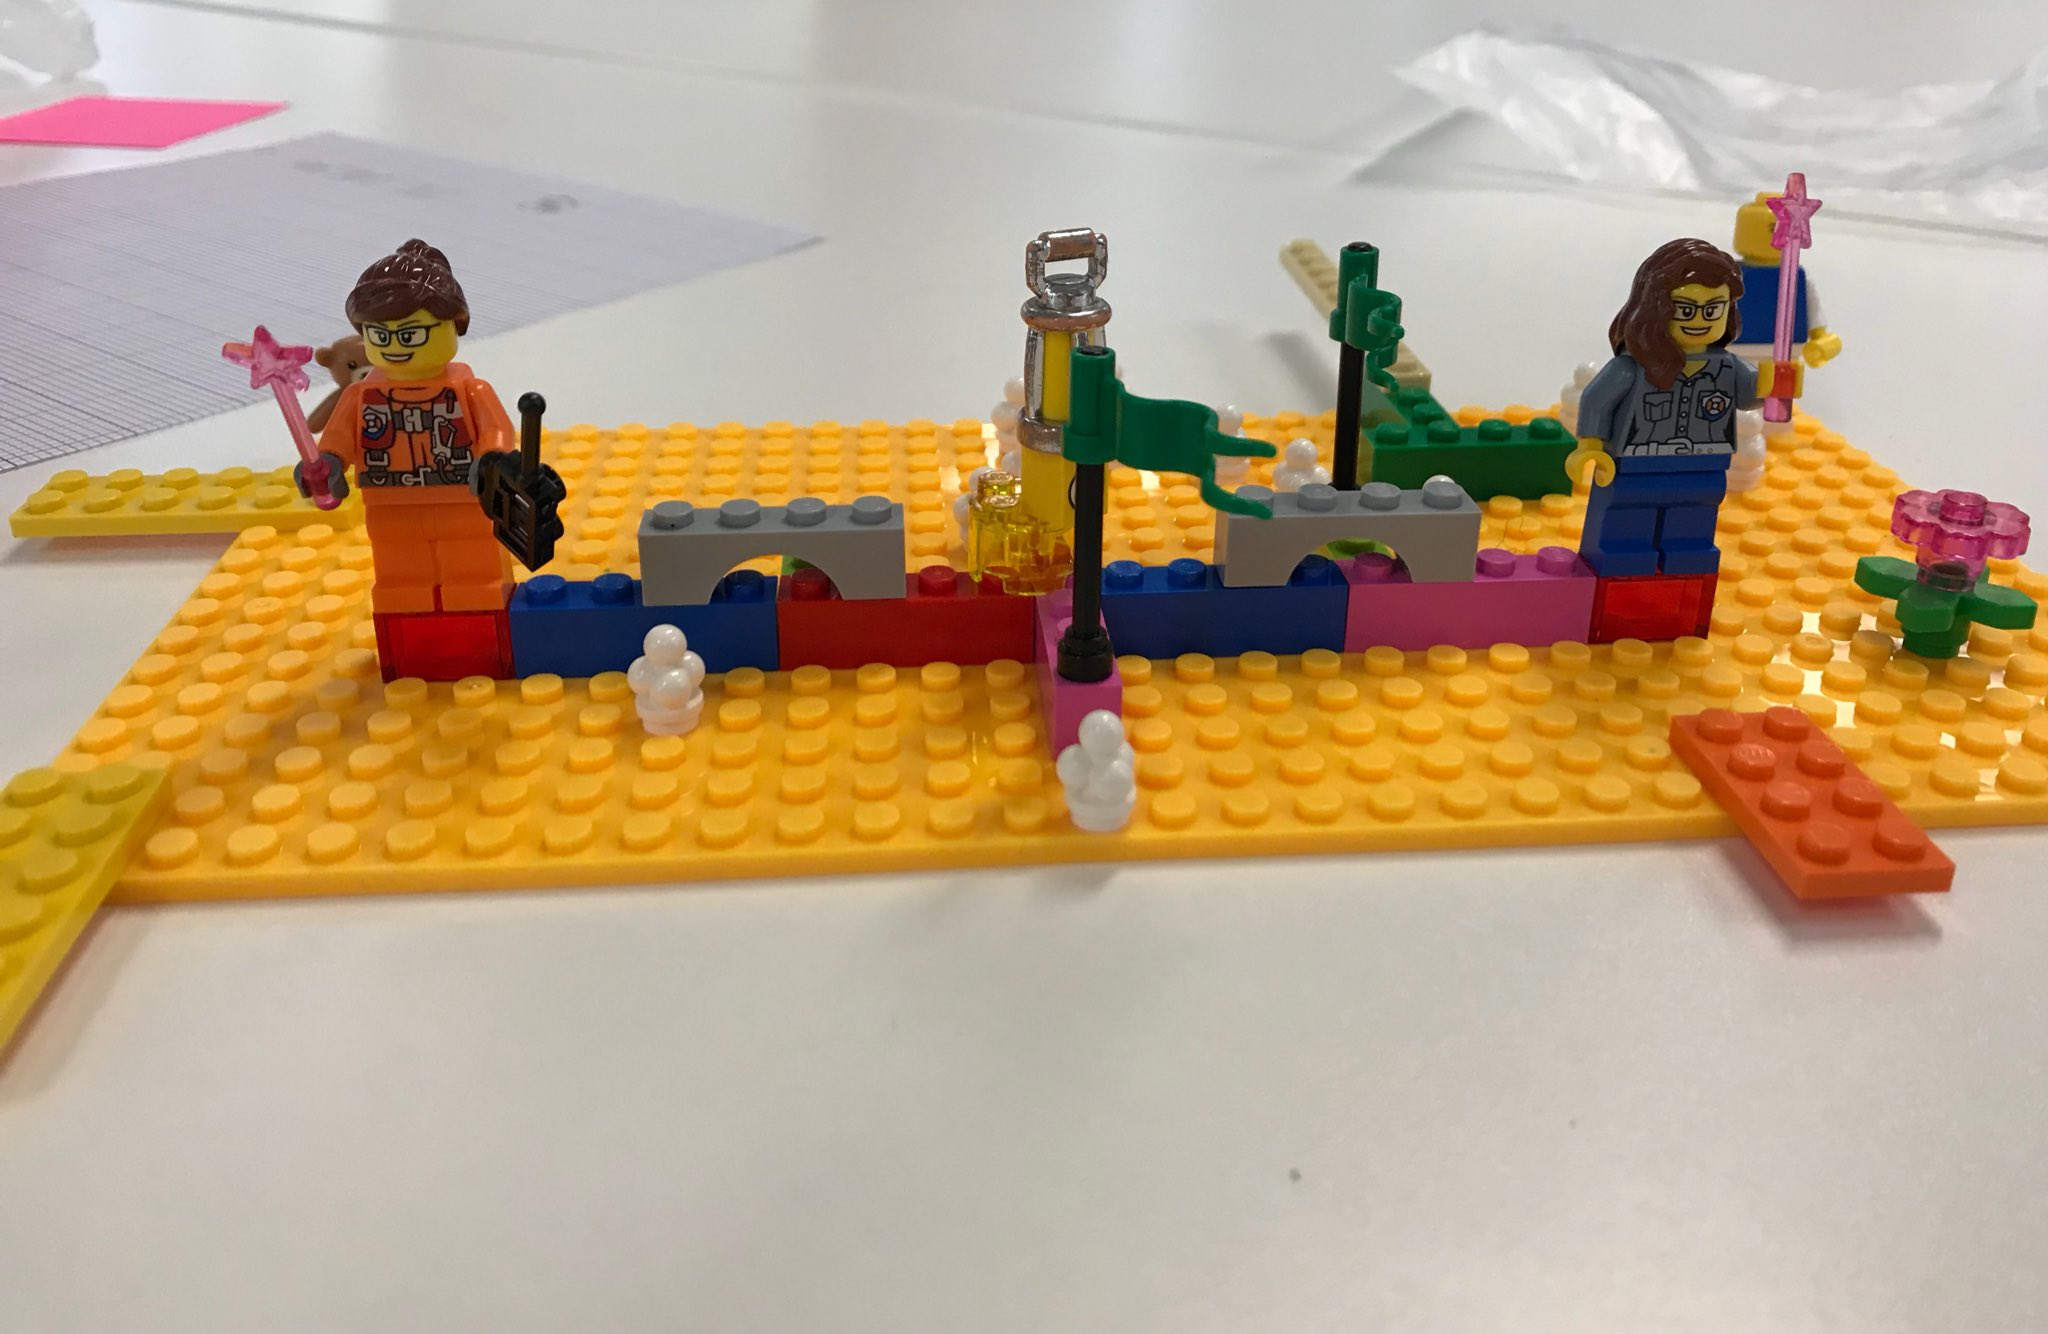 Creating our online persona in lego. #SoCMedHE17 https://t.co/bpZeLppc47